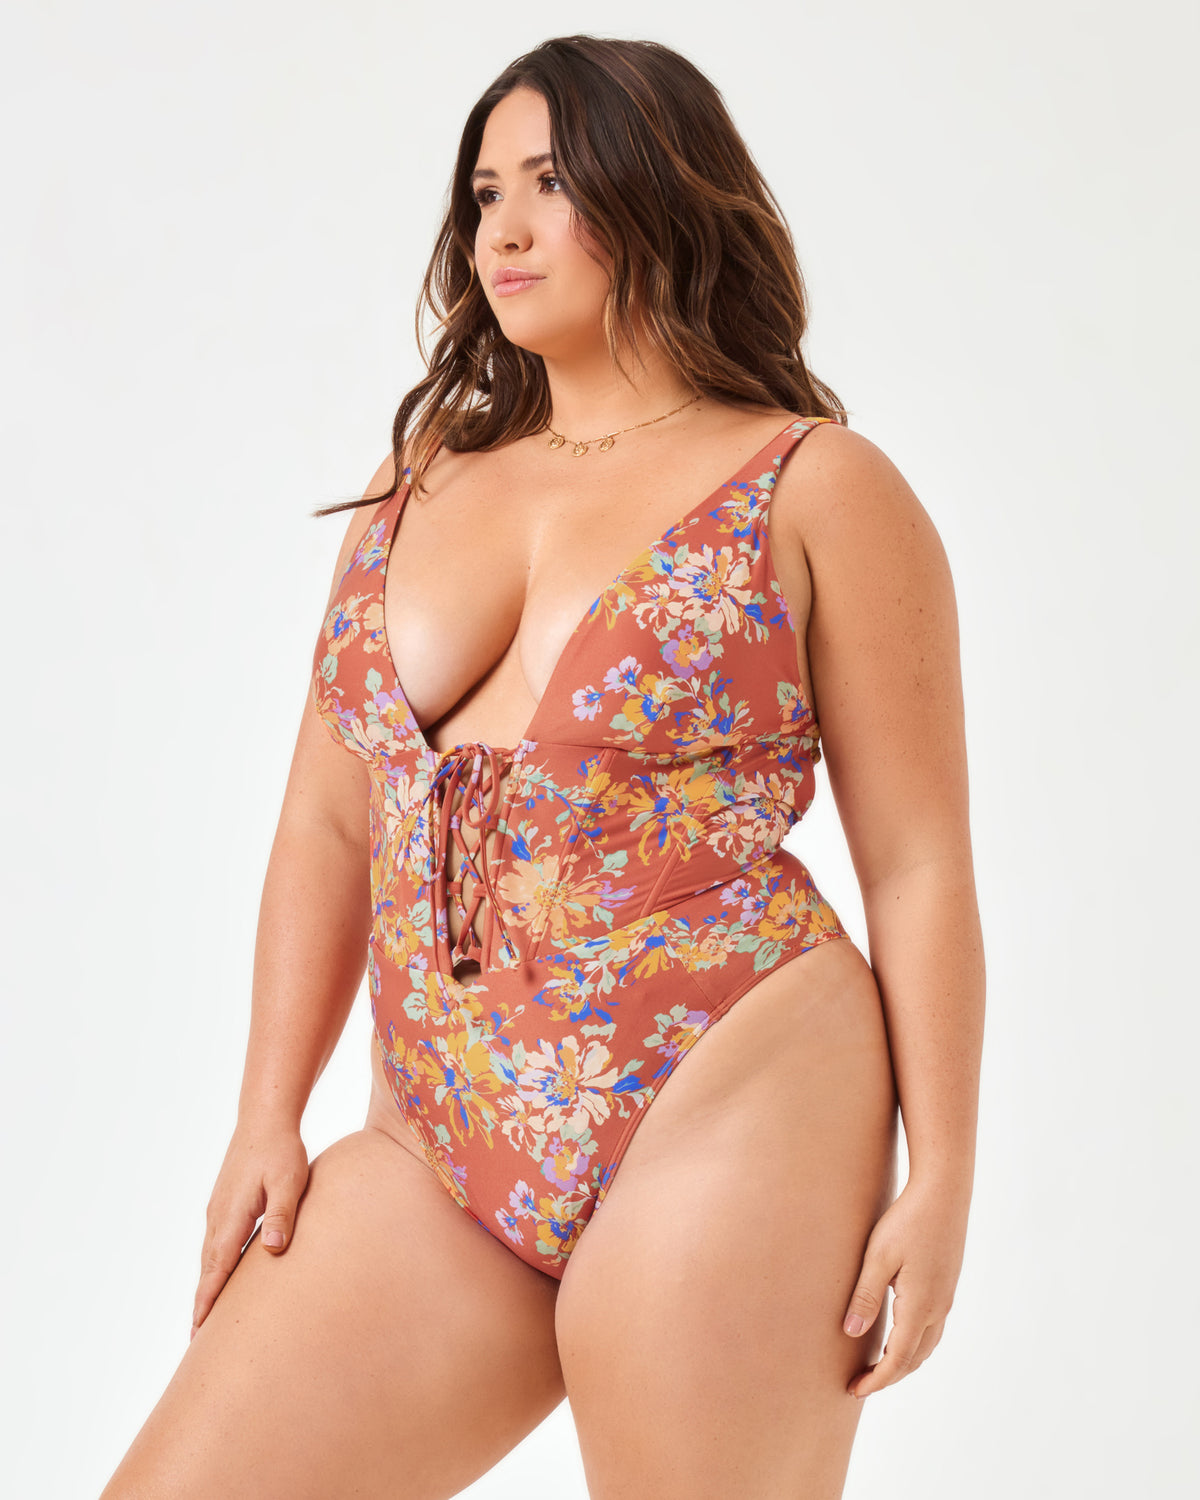 Belle One Piece - First Bloom First Bloom | Model: Jessica (size: XL)